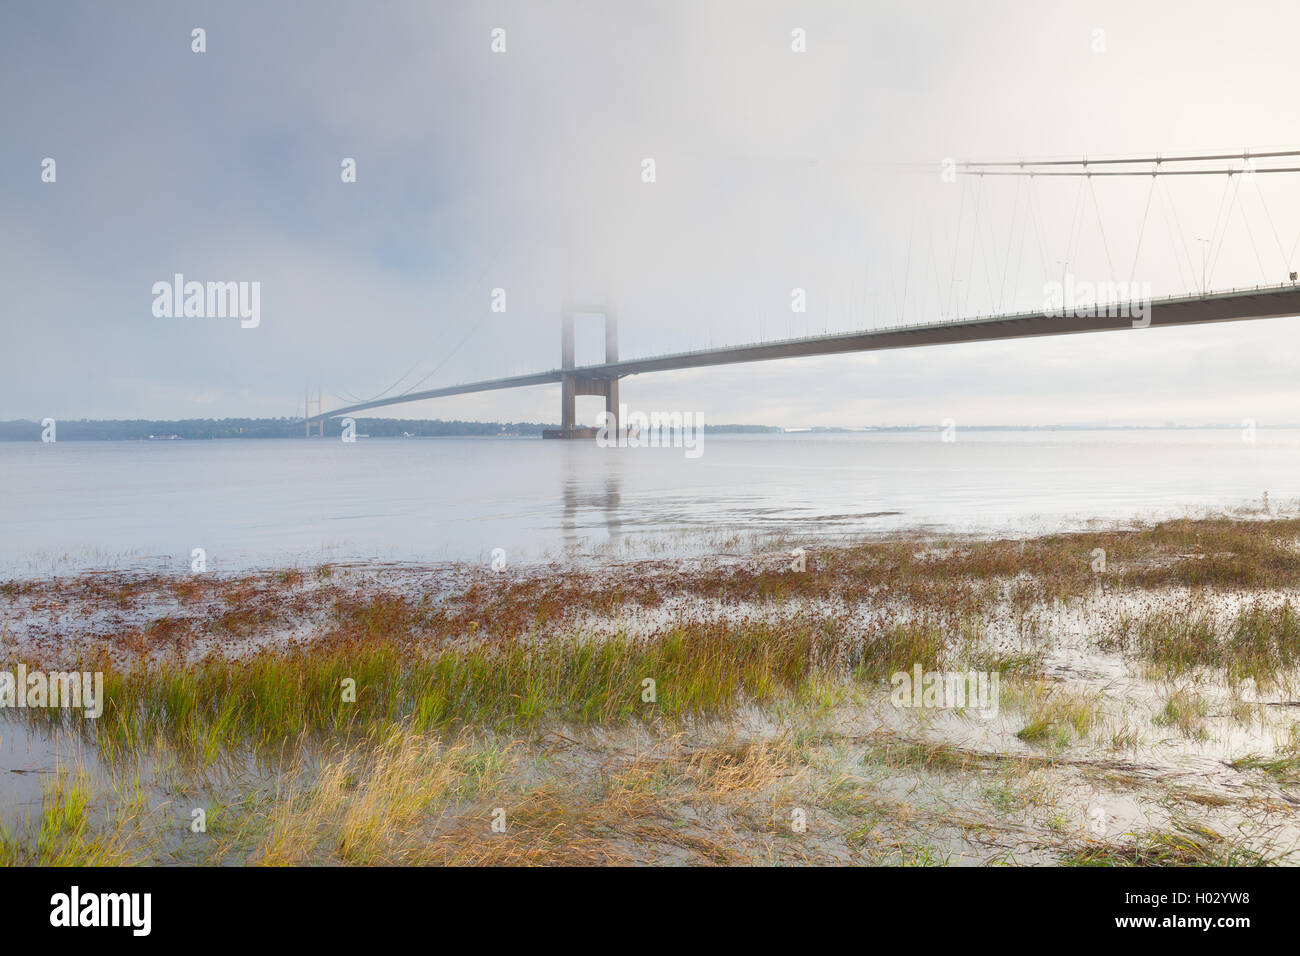 The Humber Bridge in mist and fog. The bridge links Barton-upon-Humber in North Lincolnshire to Hessle in East Yorkshire. Stock Photo